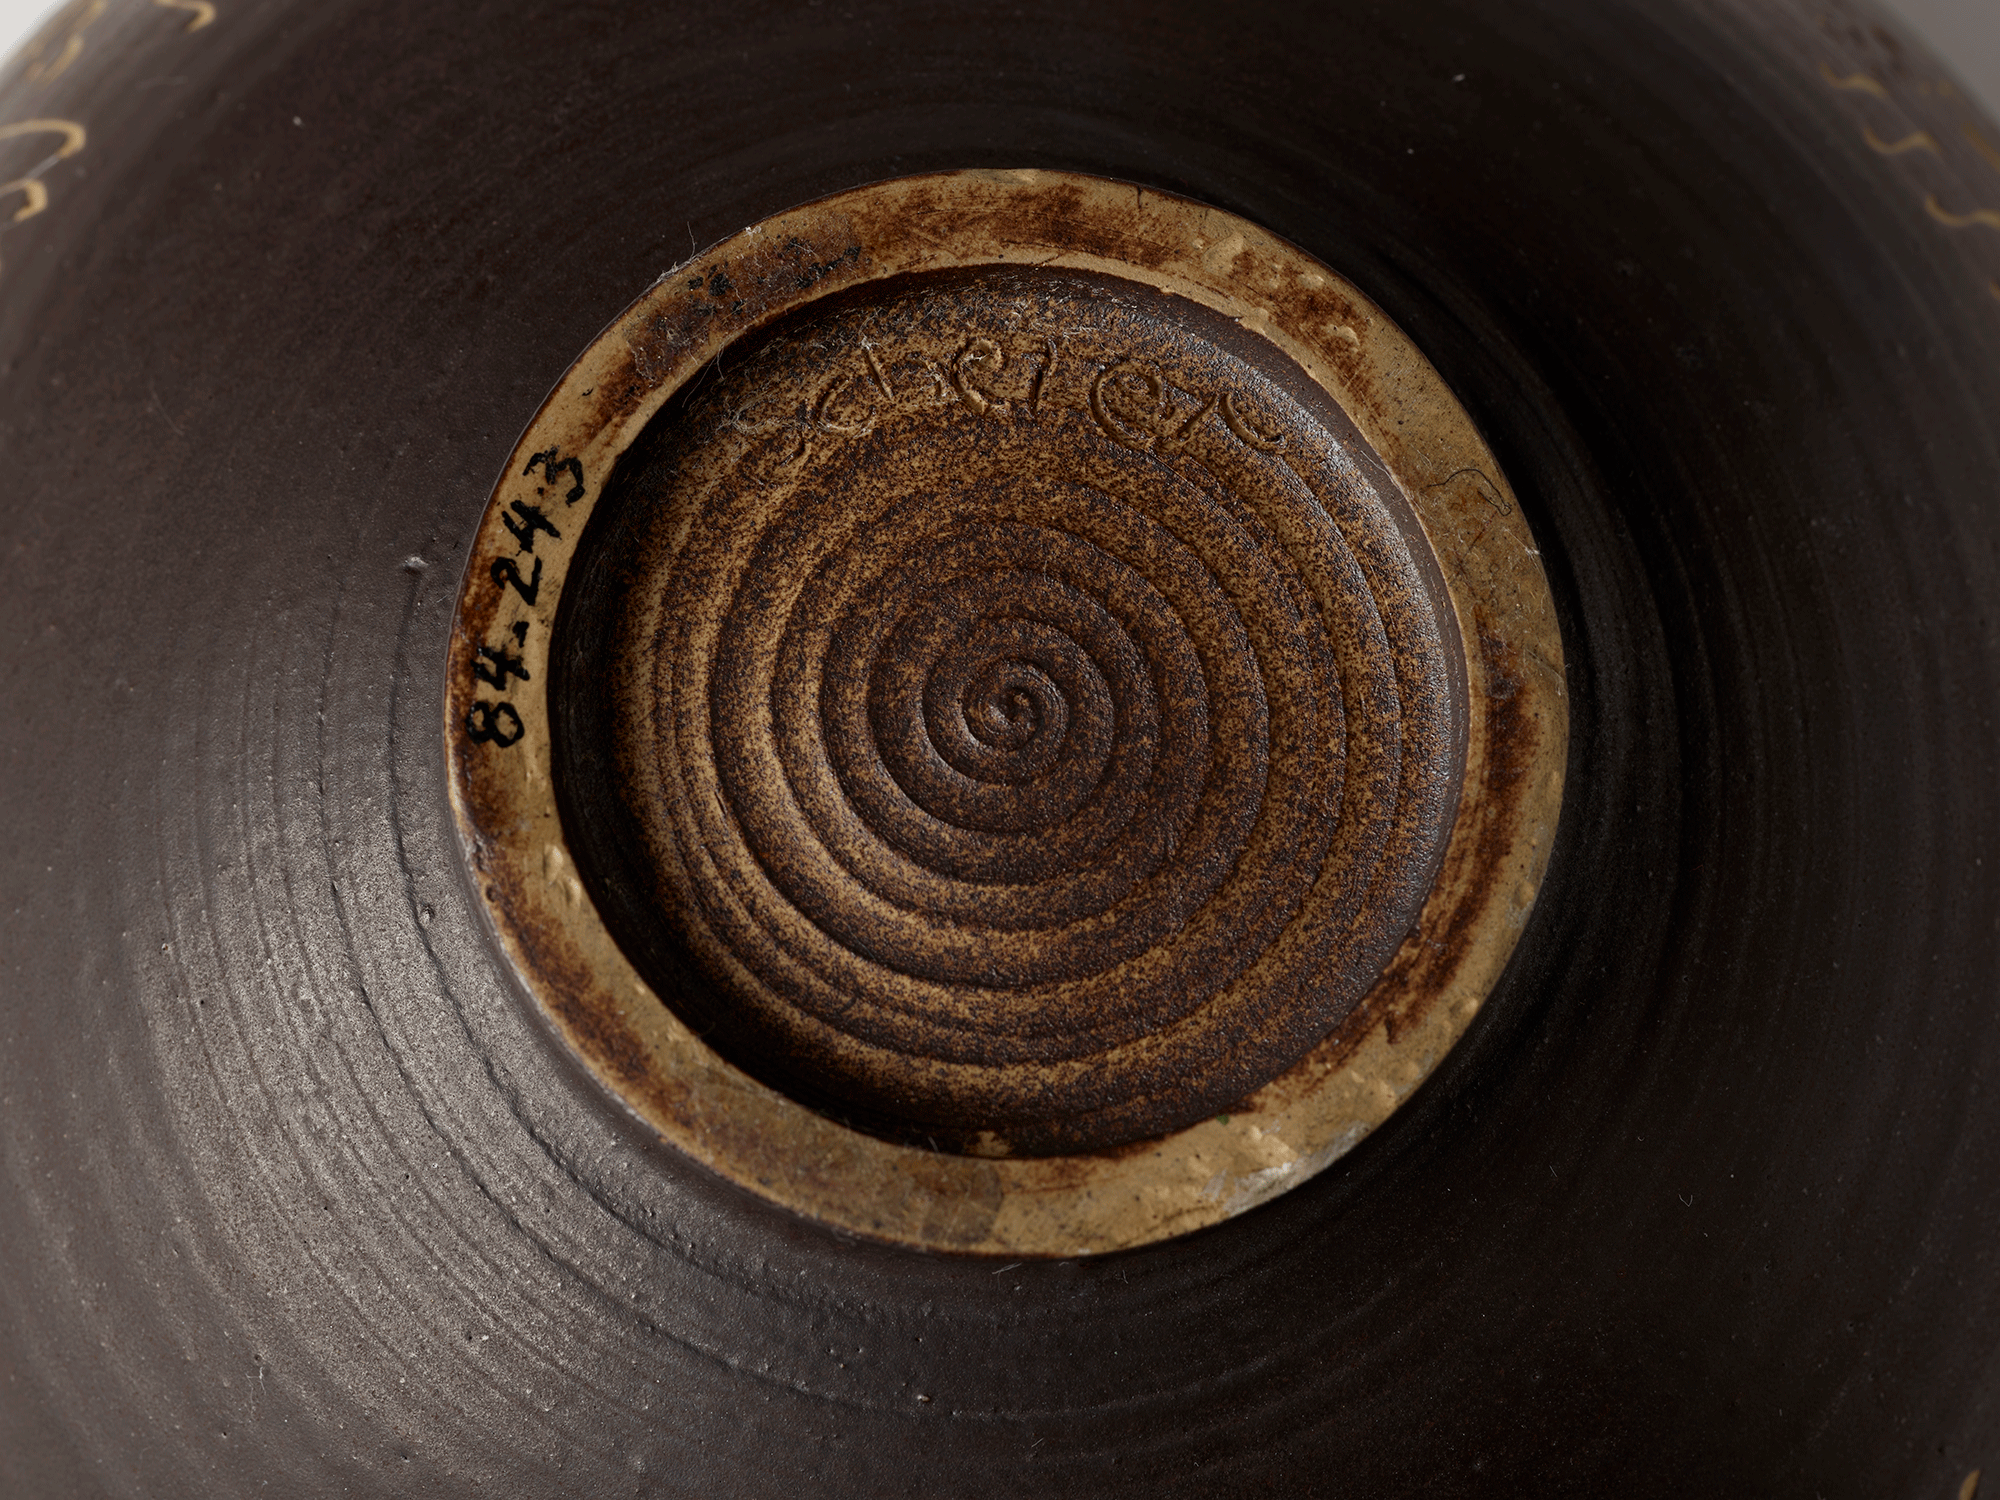 Underside of the bowl with the name “Scheier” scratched into the clay. Accession number is visible.